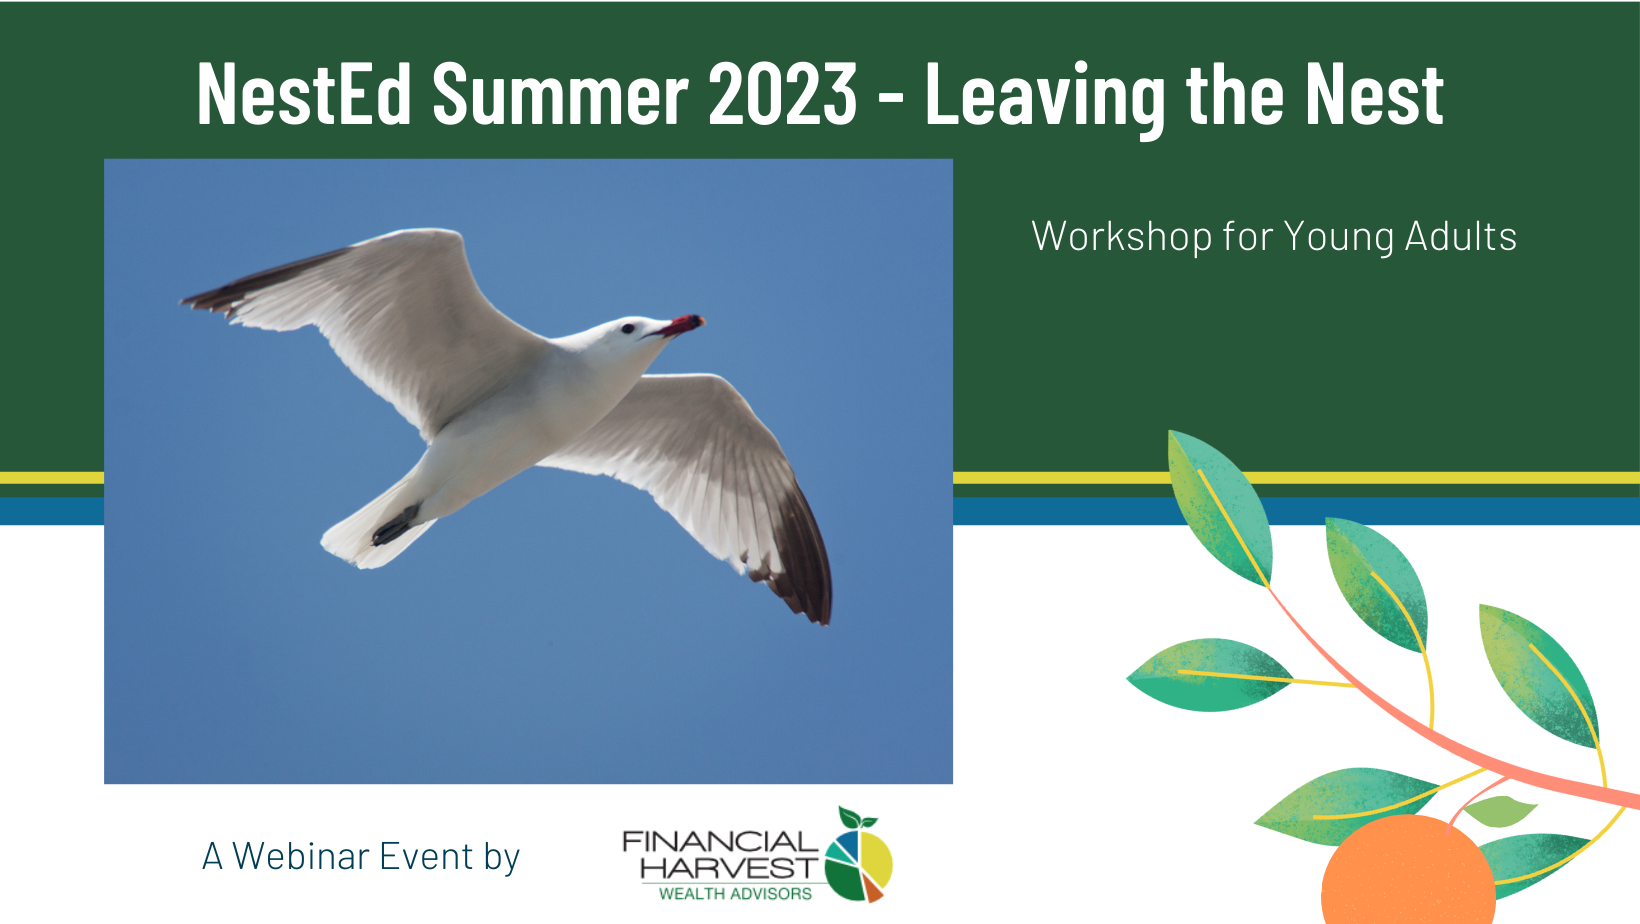 Tomorrow: nested summer 2023 - leaving the nest